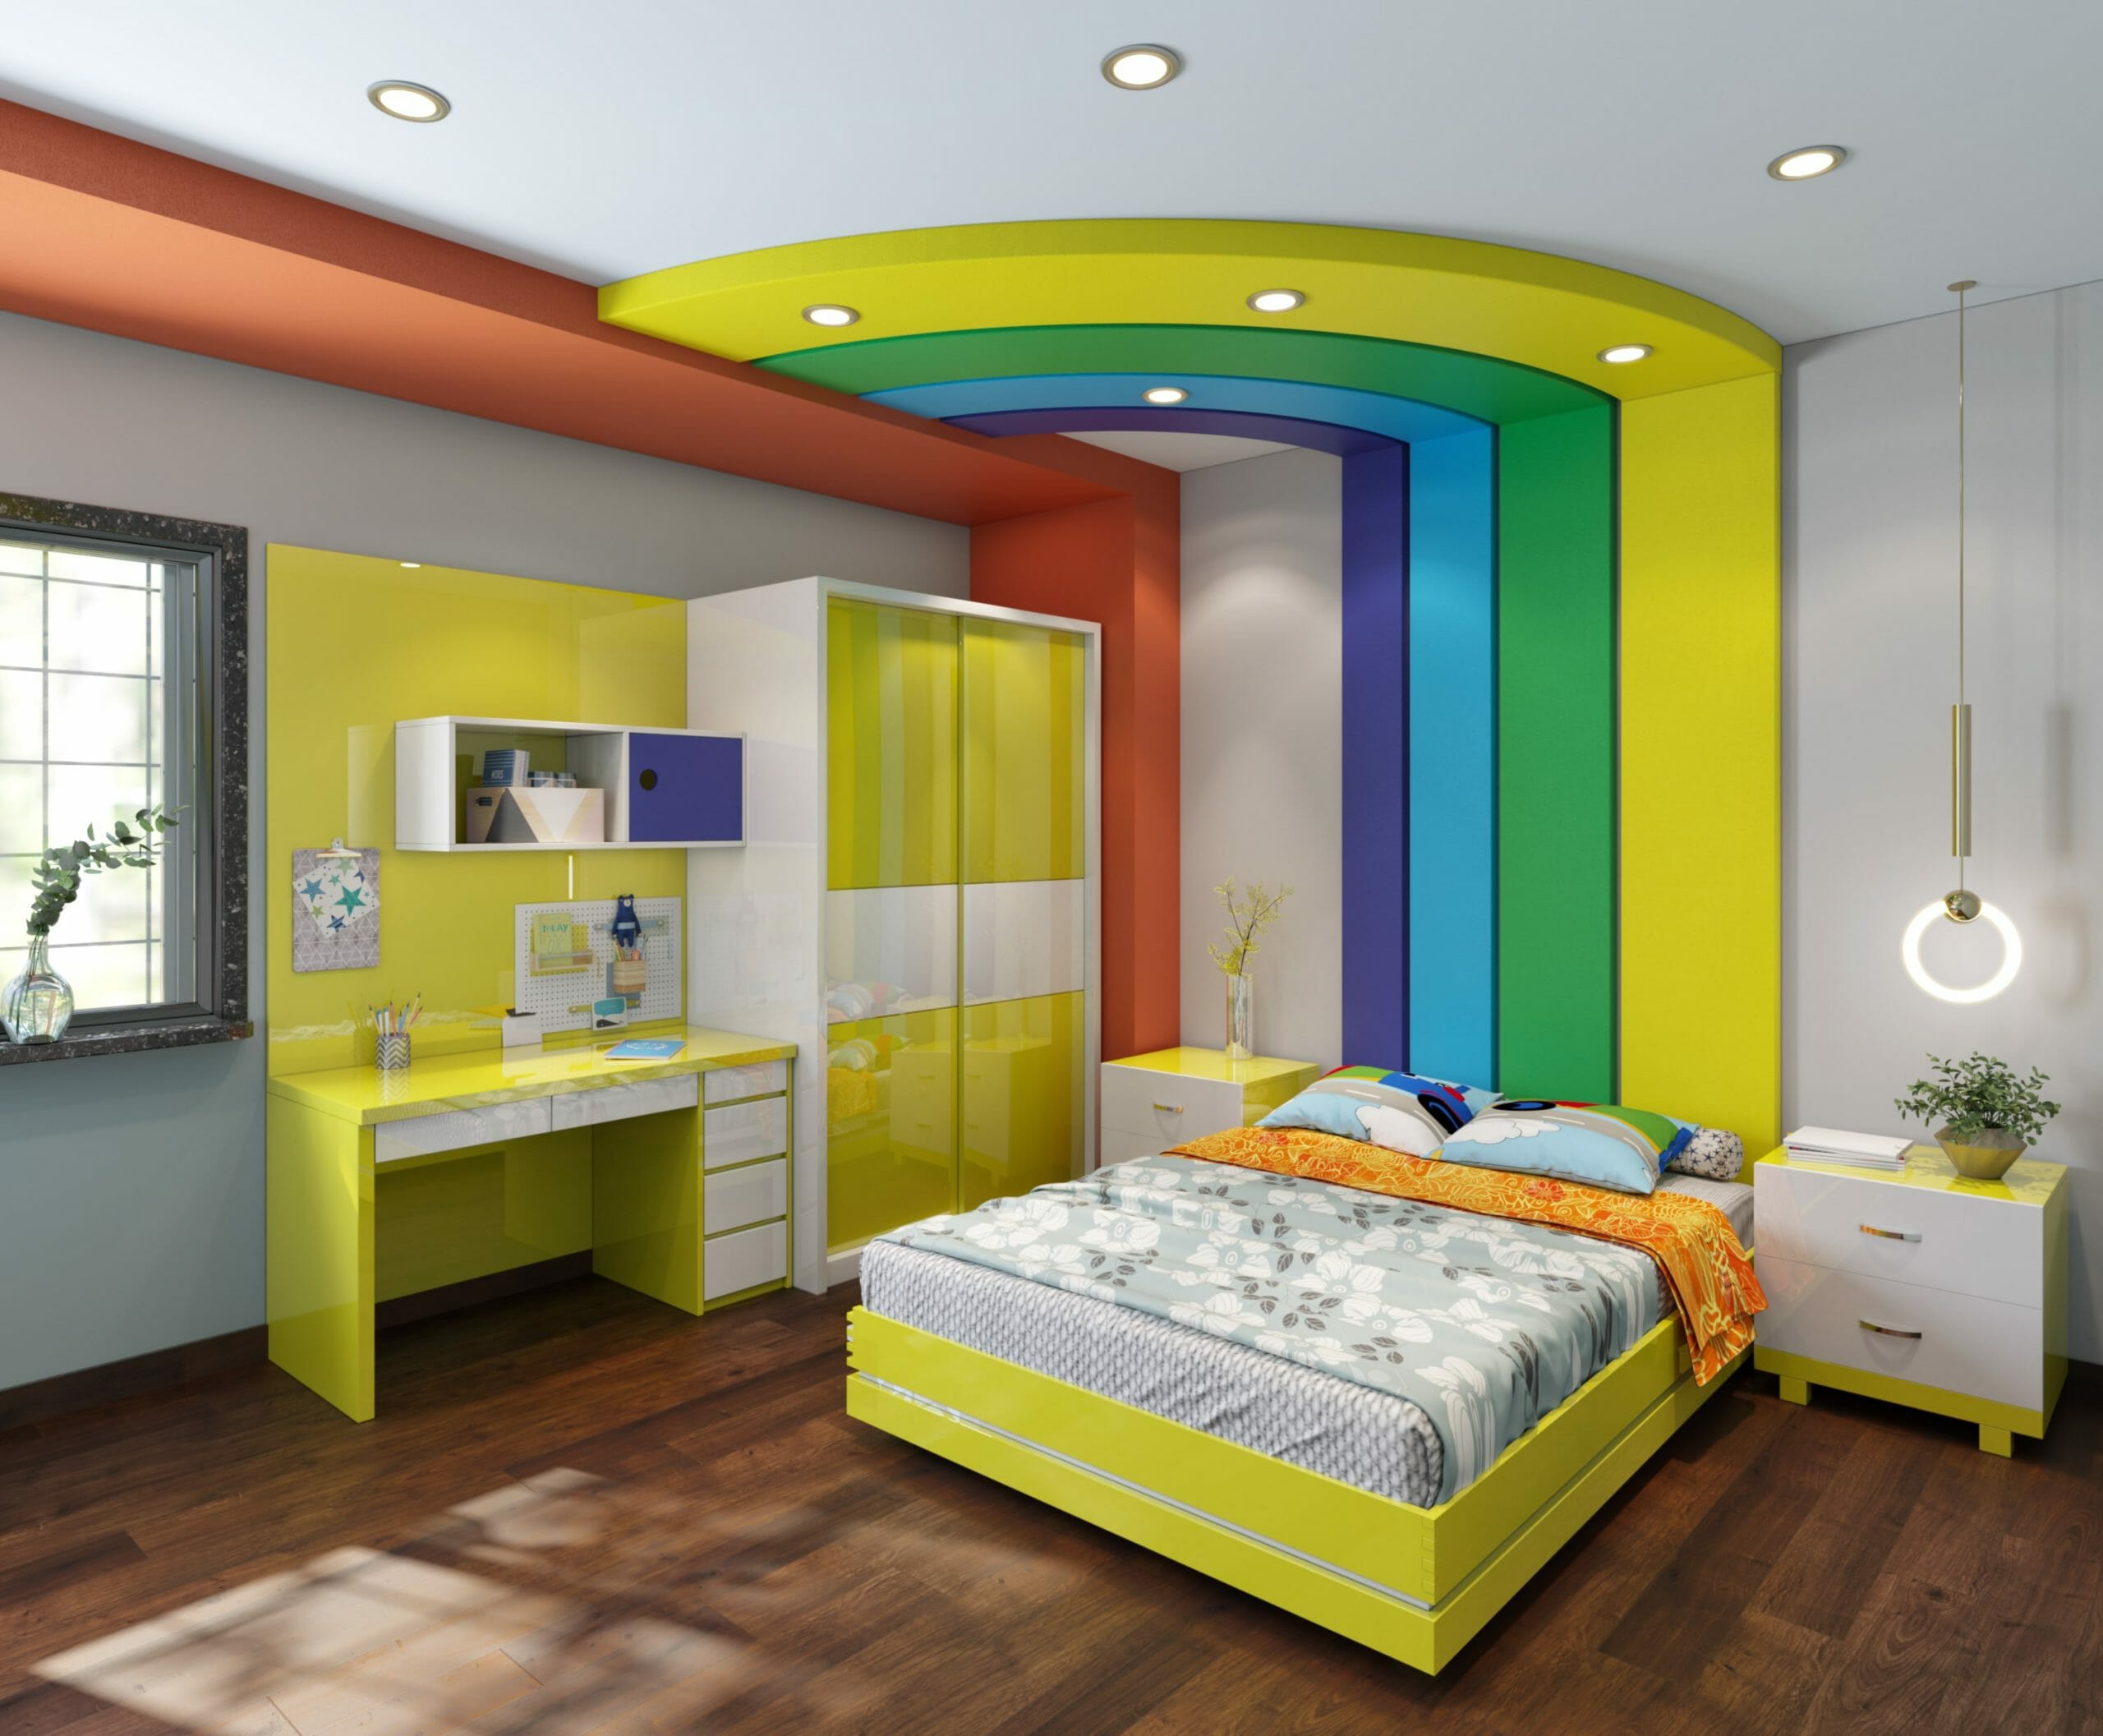 Colorful Rainbow Themed Kids Room Interior Design Scaled 